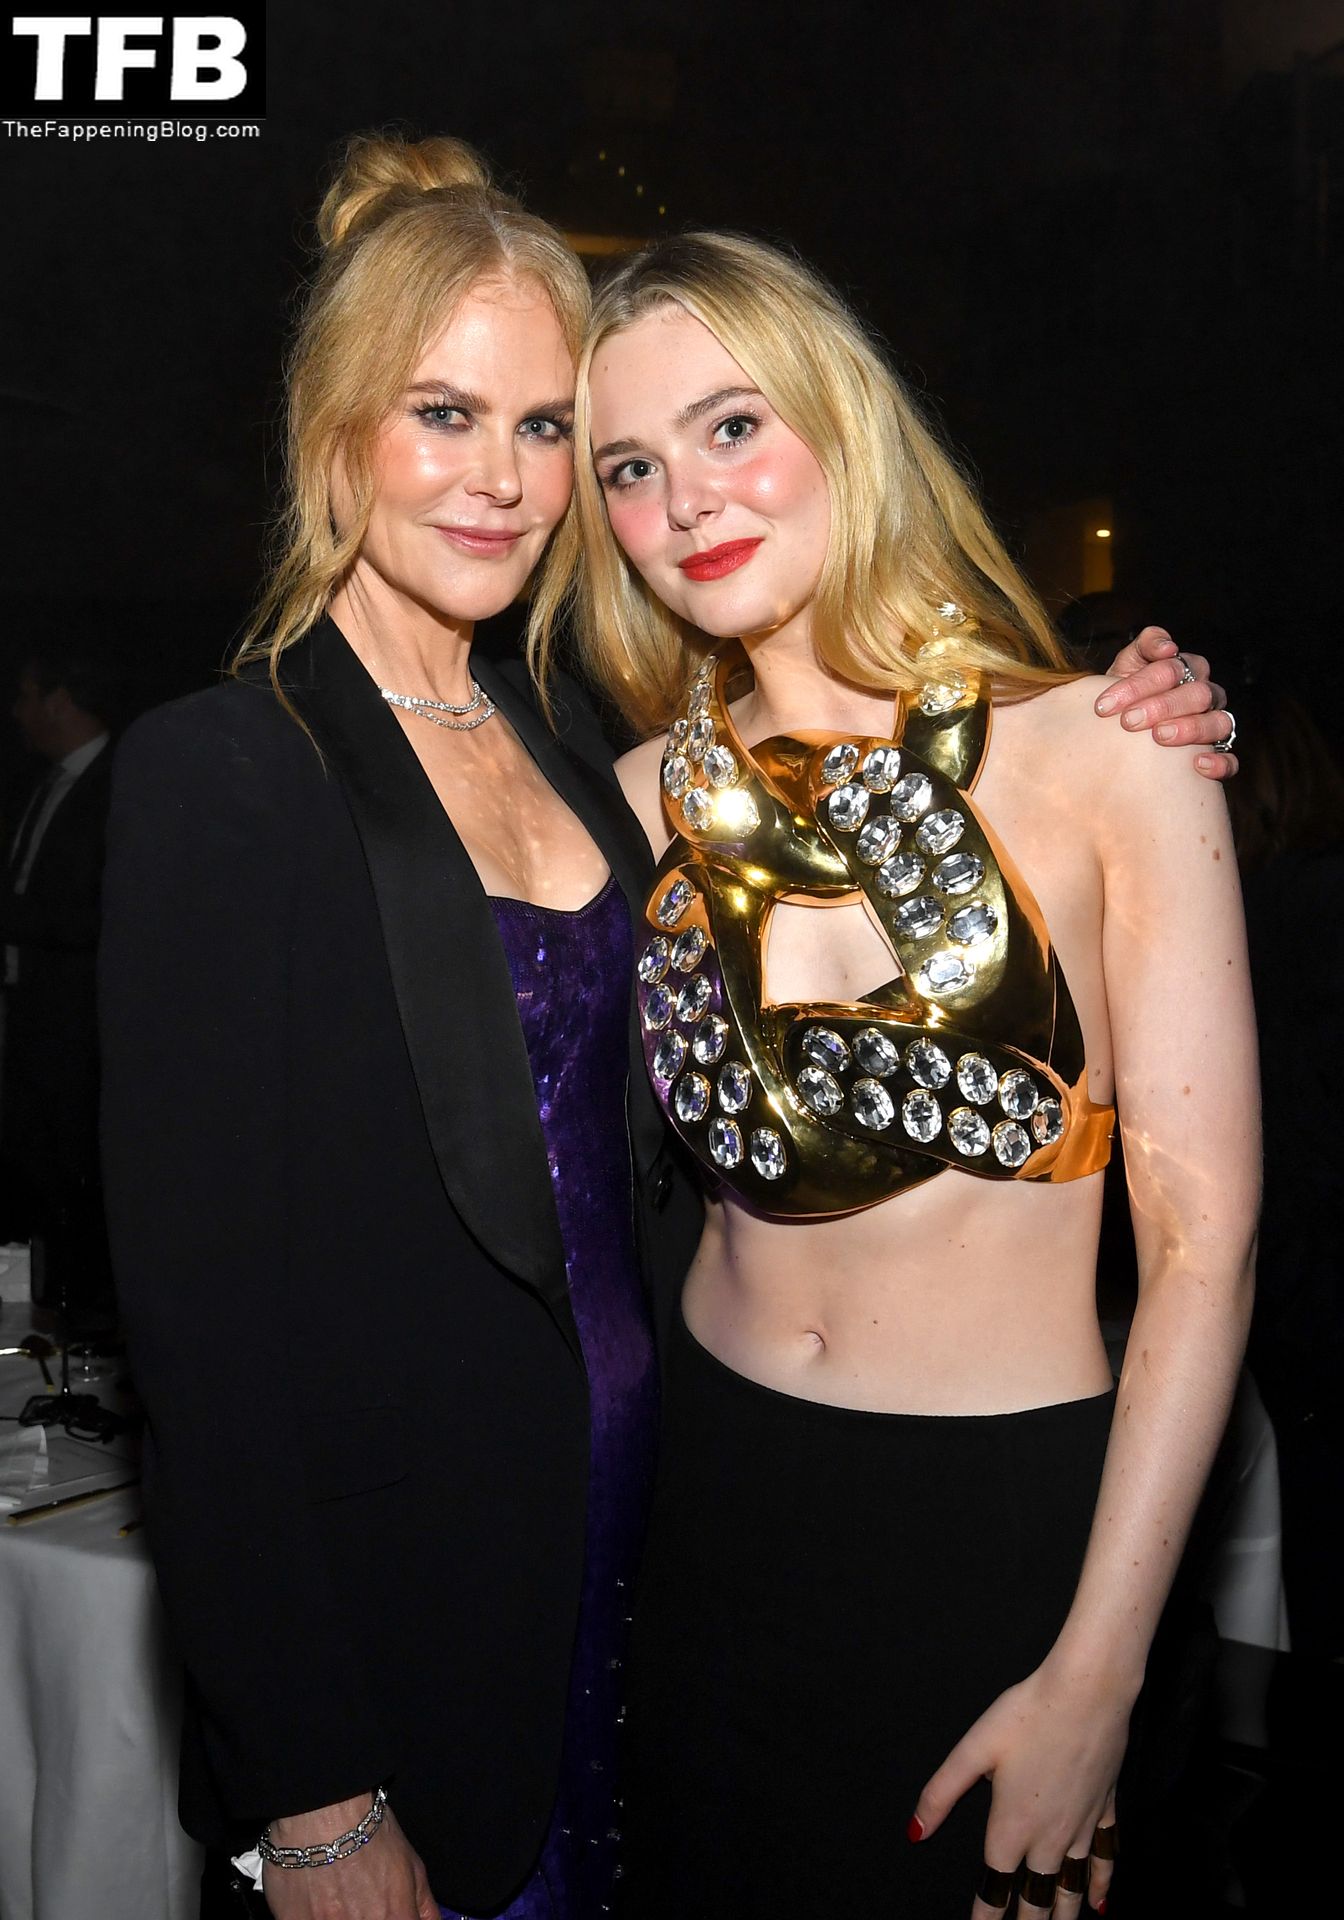 Elle-Fanning-Sexy-Braless-The-Fappening-Blog-42.jpg